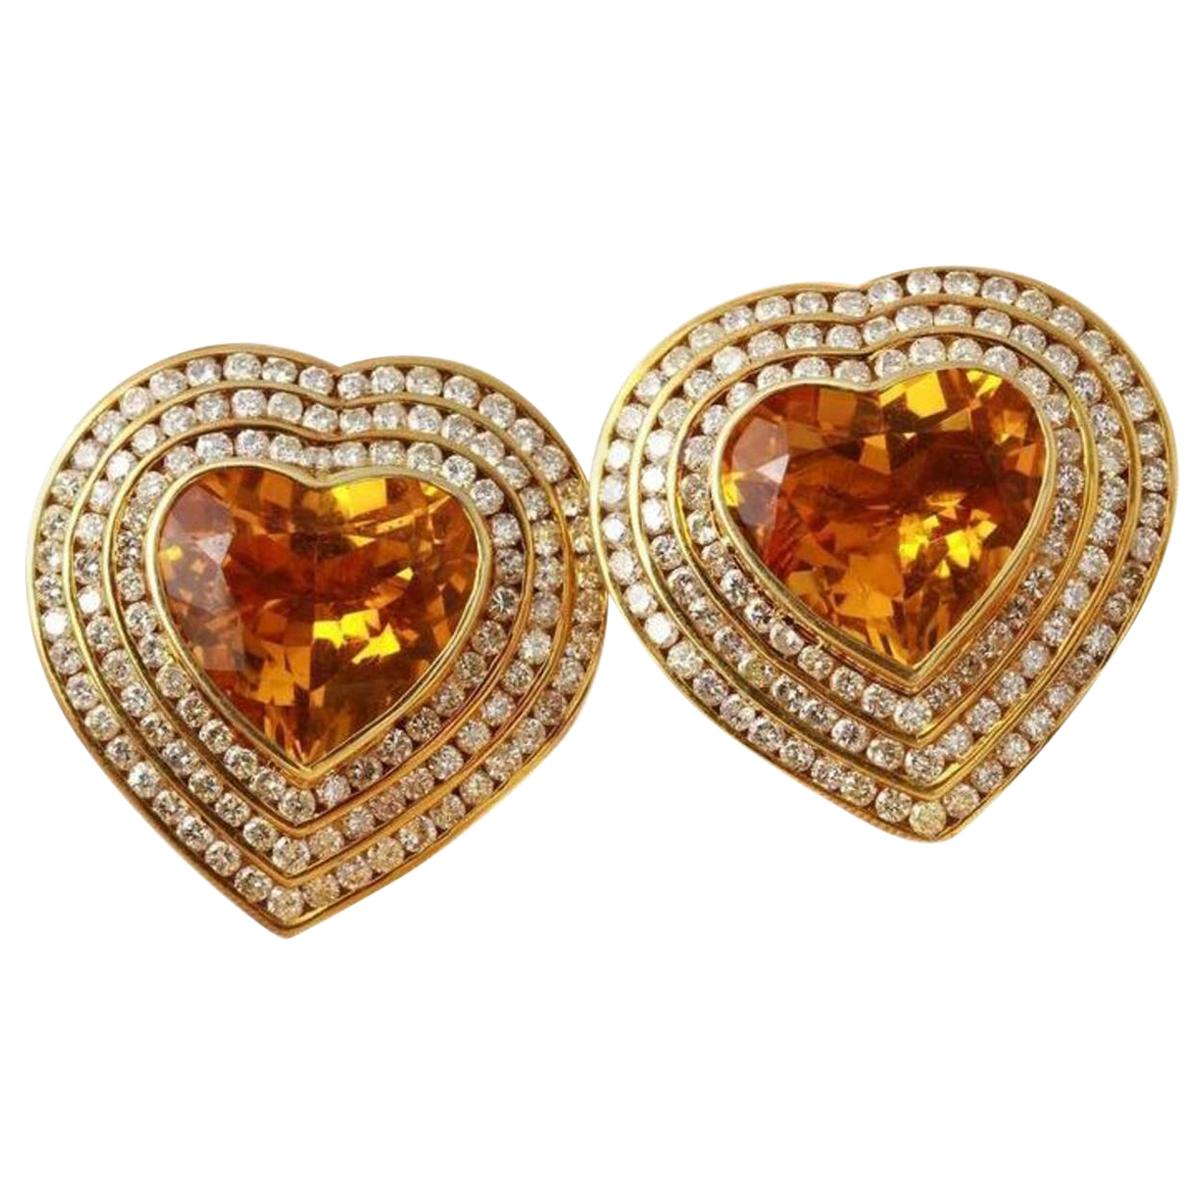 Exquisite 25.75 Carat Natural Madeira Citrine and Diamond 14 Karat Solid Gold For Sale